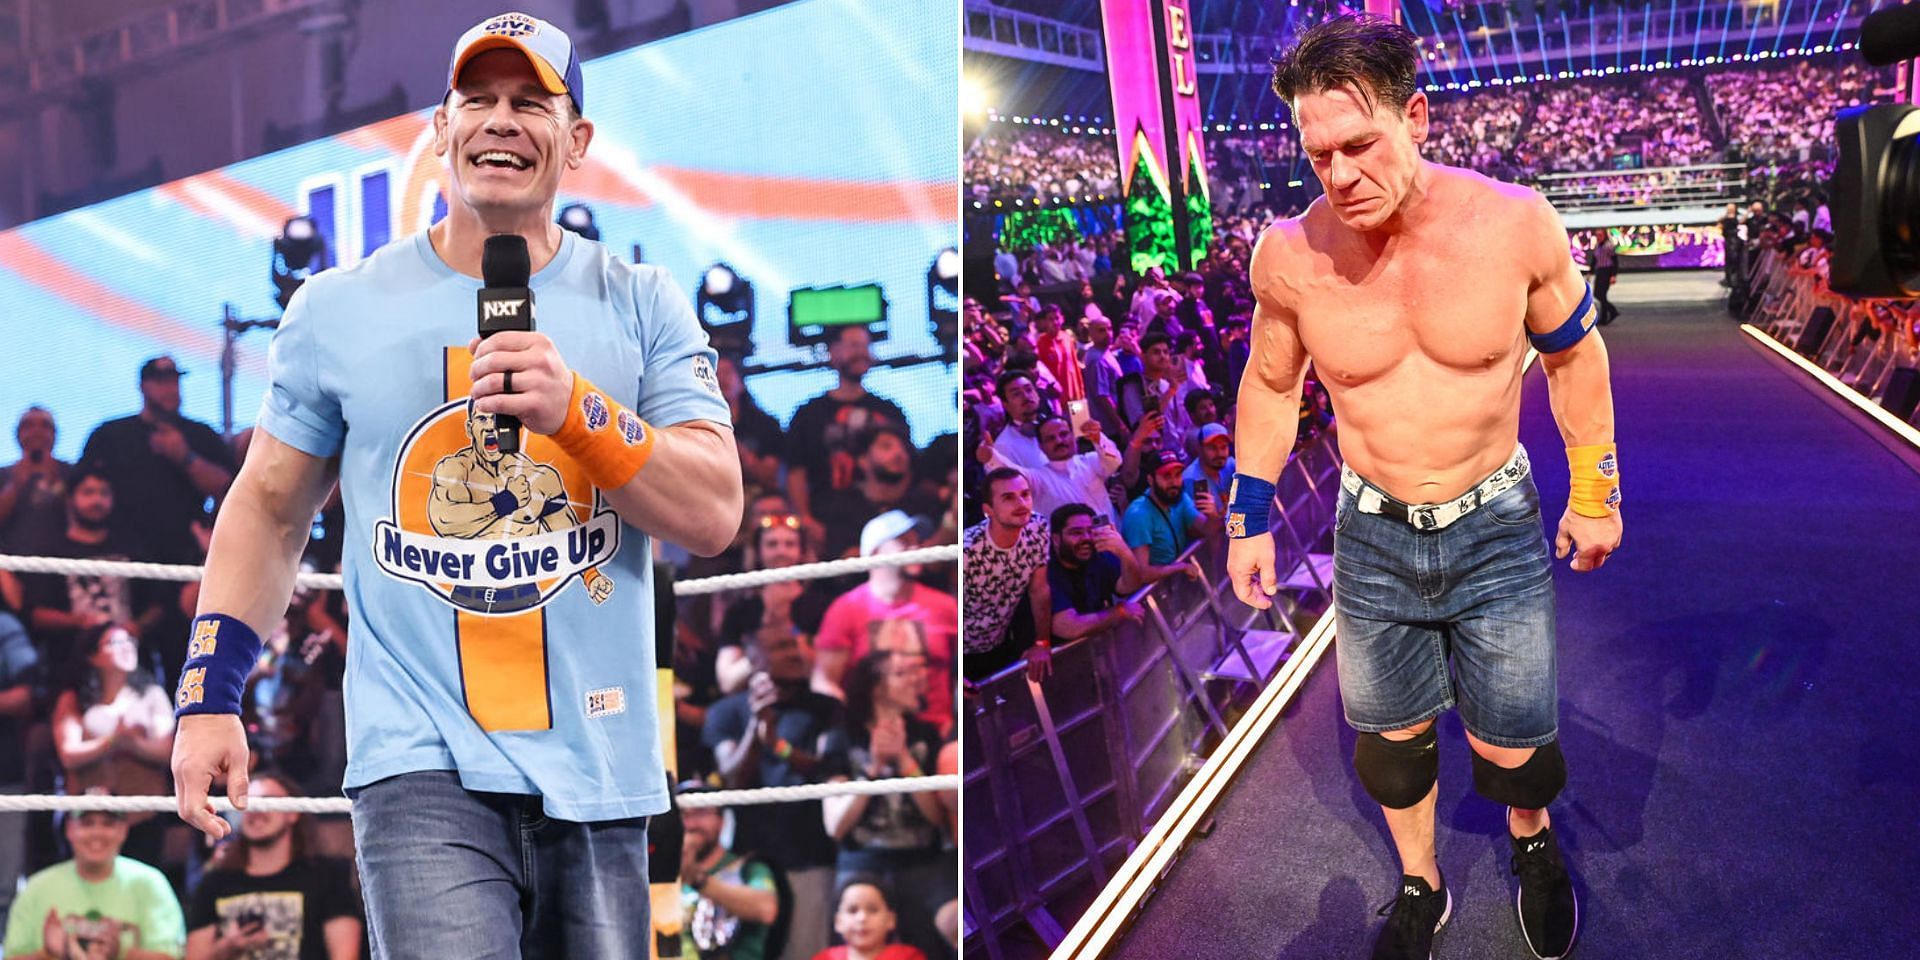 John Cena commented on his WWE status 